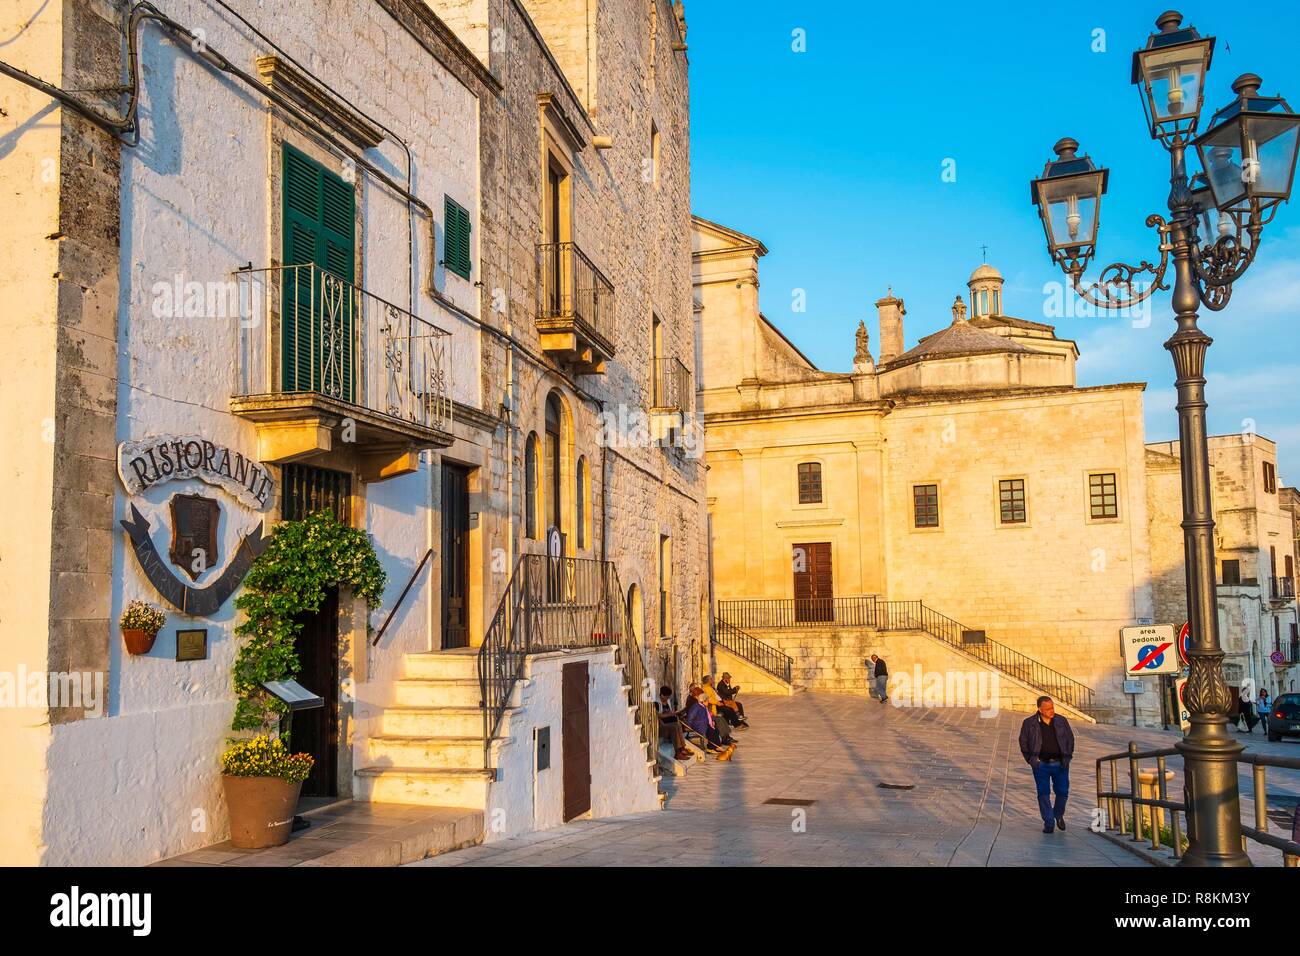 Italy, Apulia, Itria Valley, Cisternino, Piazza Giuseppe Garibaldi, Mother Church, devoted to St Nicholas from Patara (St Nicholas of Bari) was built in Apulian late romanesque style around the XV century and the Norman-Swabian tower or Porta Grande on the left Stock Photo